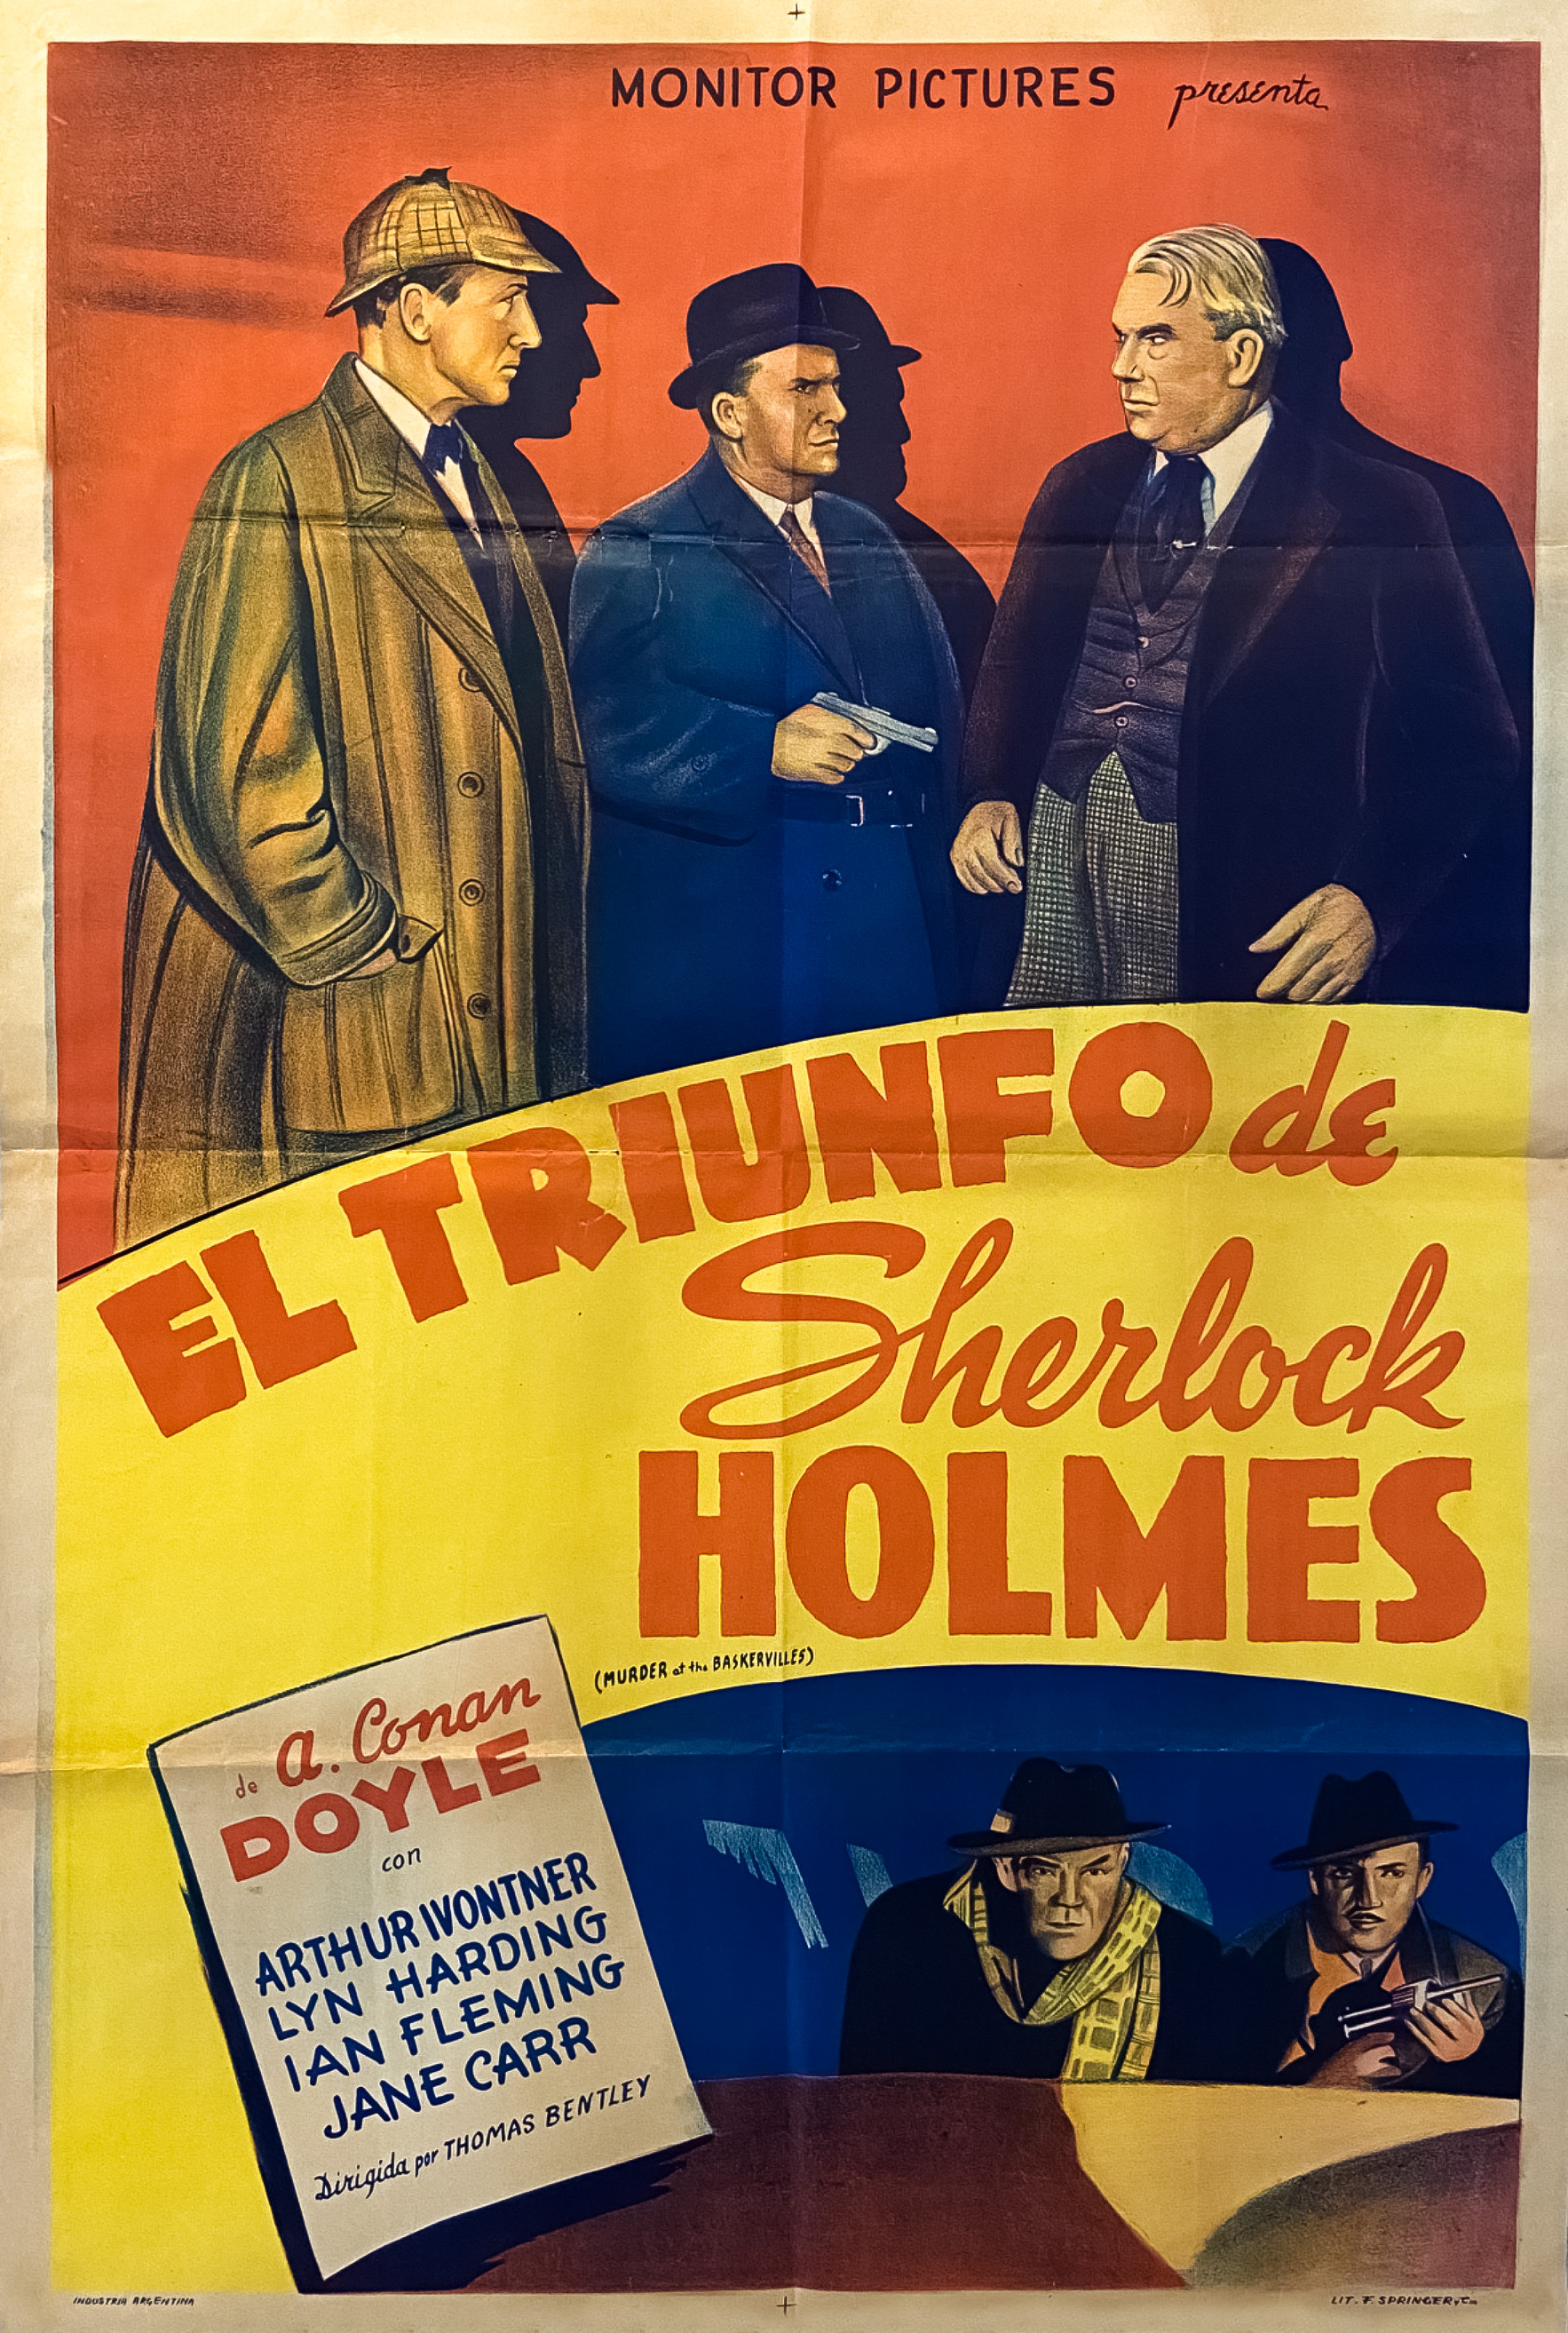 The Triumph of Sherlock Holmes - (1935 movie) poster